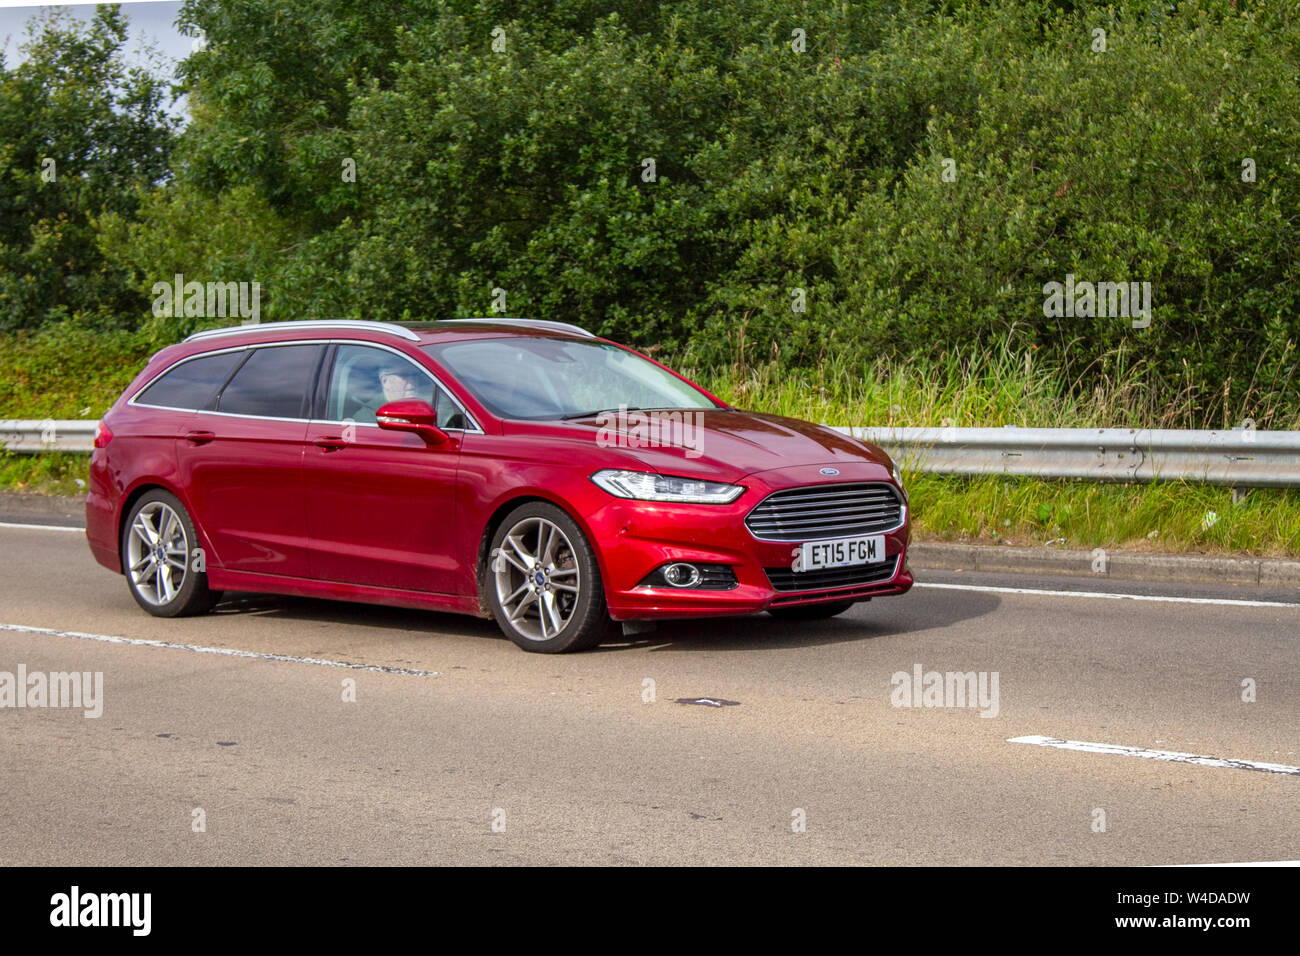 2015 15 plate Ford Mondeo Titanium Auto; festival of Transport held the in seaside town of Fleetwood, Lancashire, UK Stock Photo - Alamy